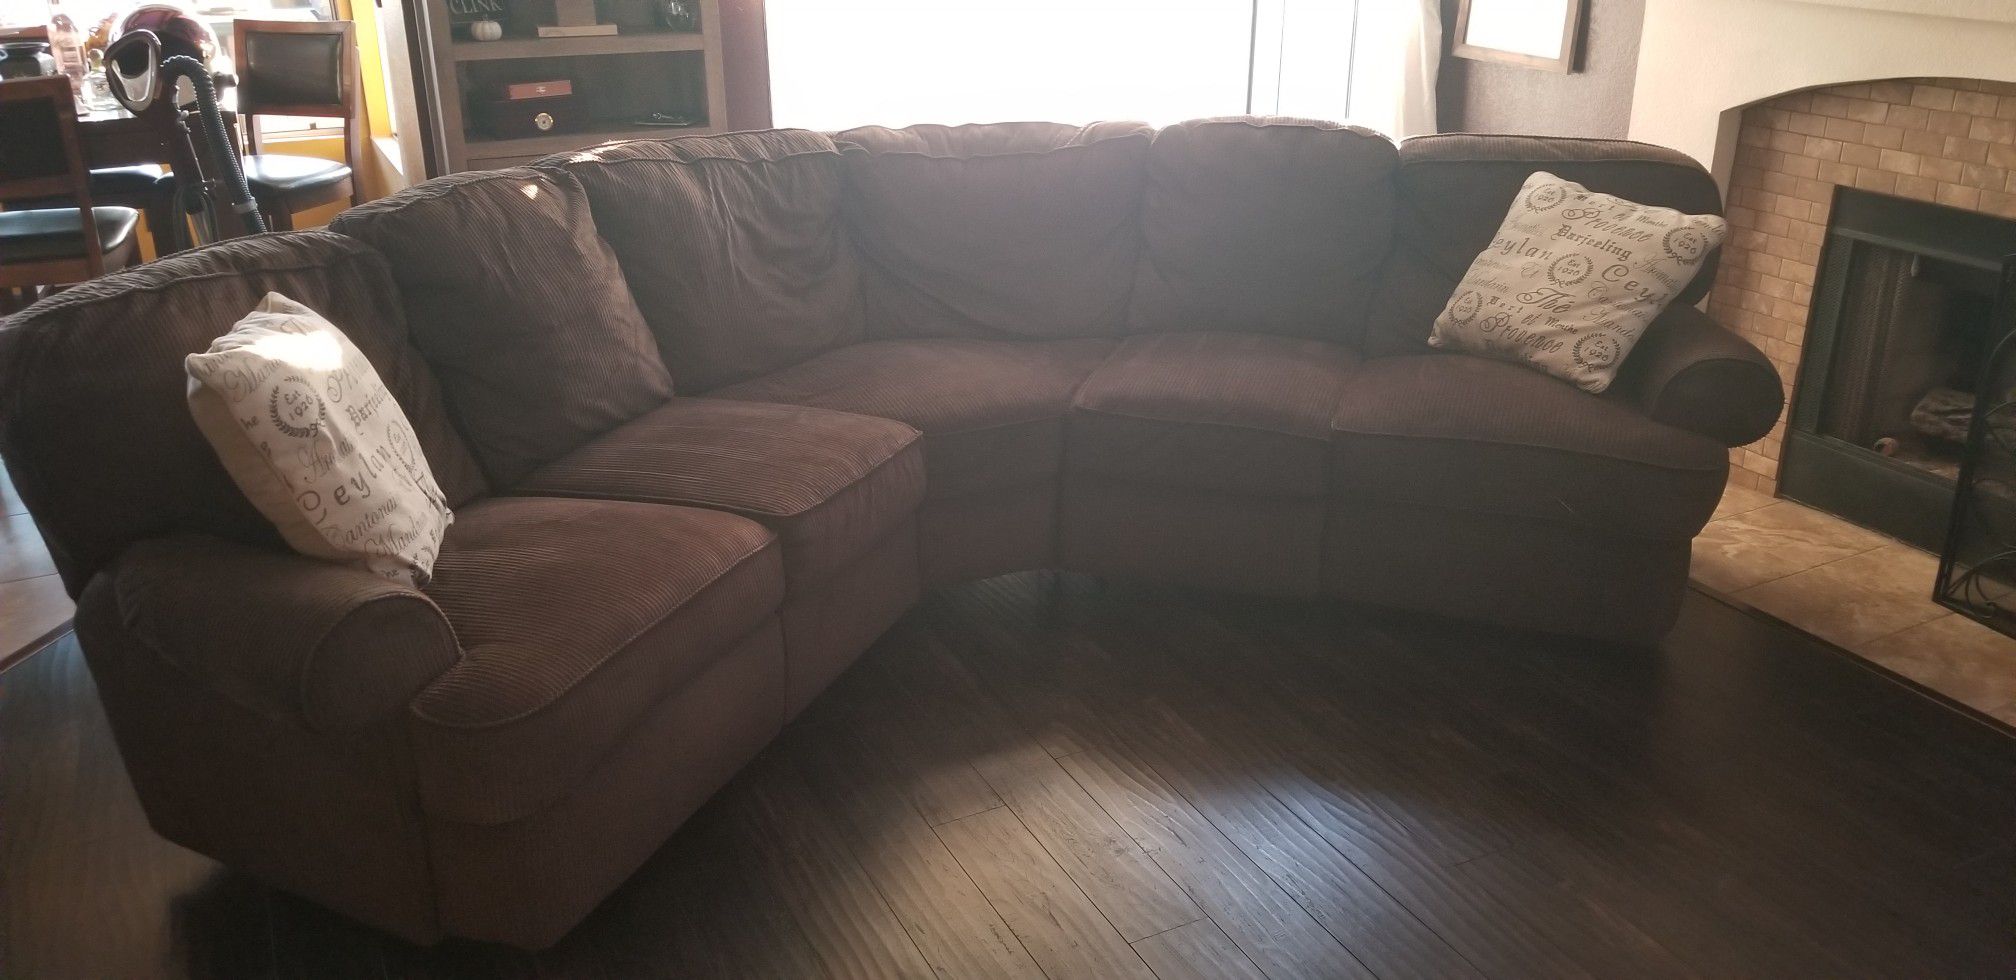 Three Piece Sectional Sofa with Recliners